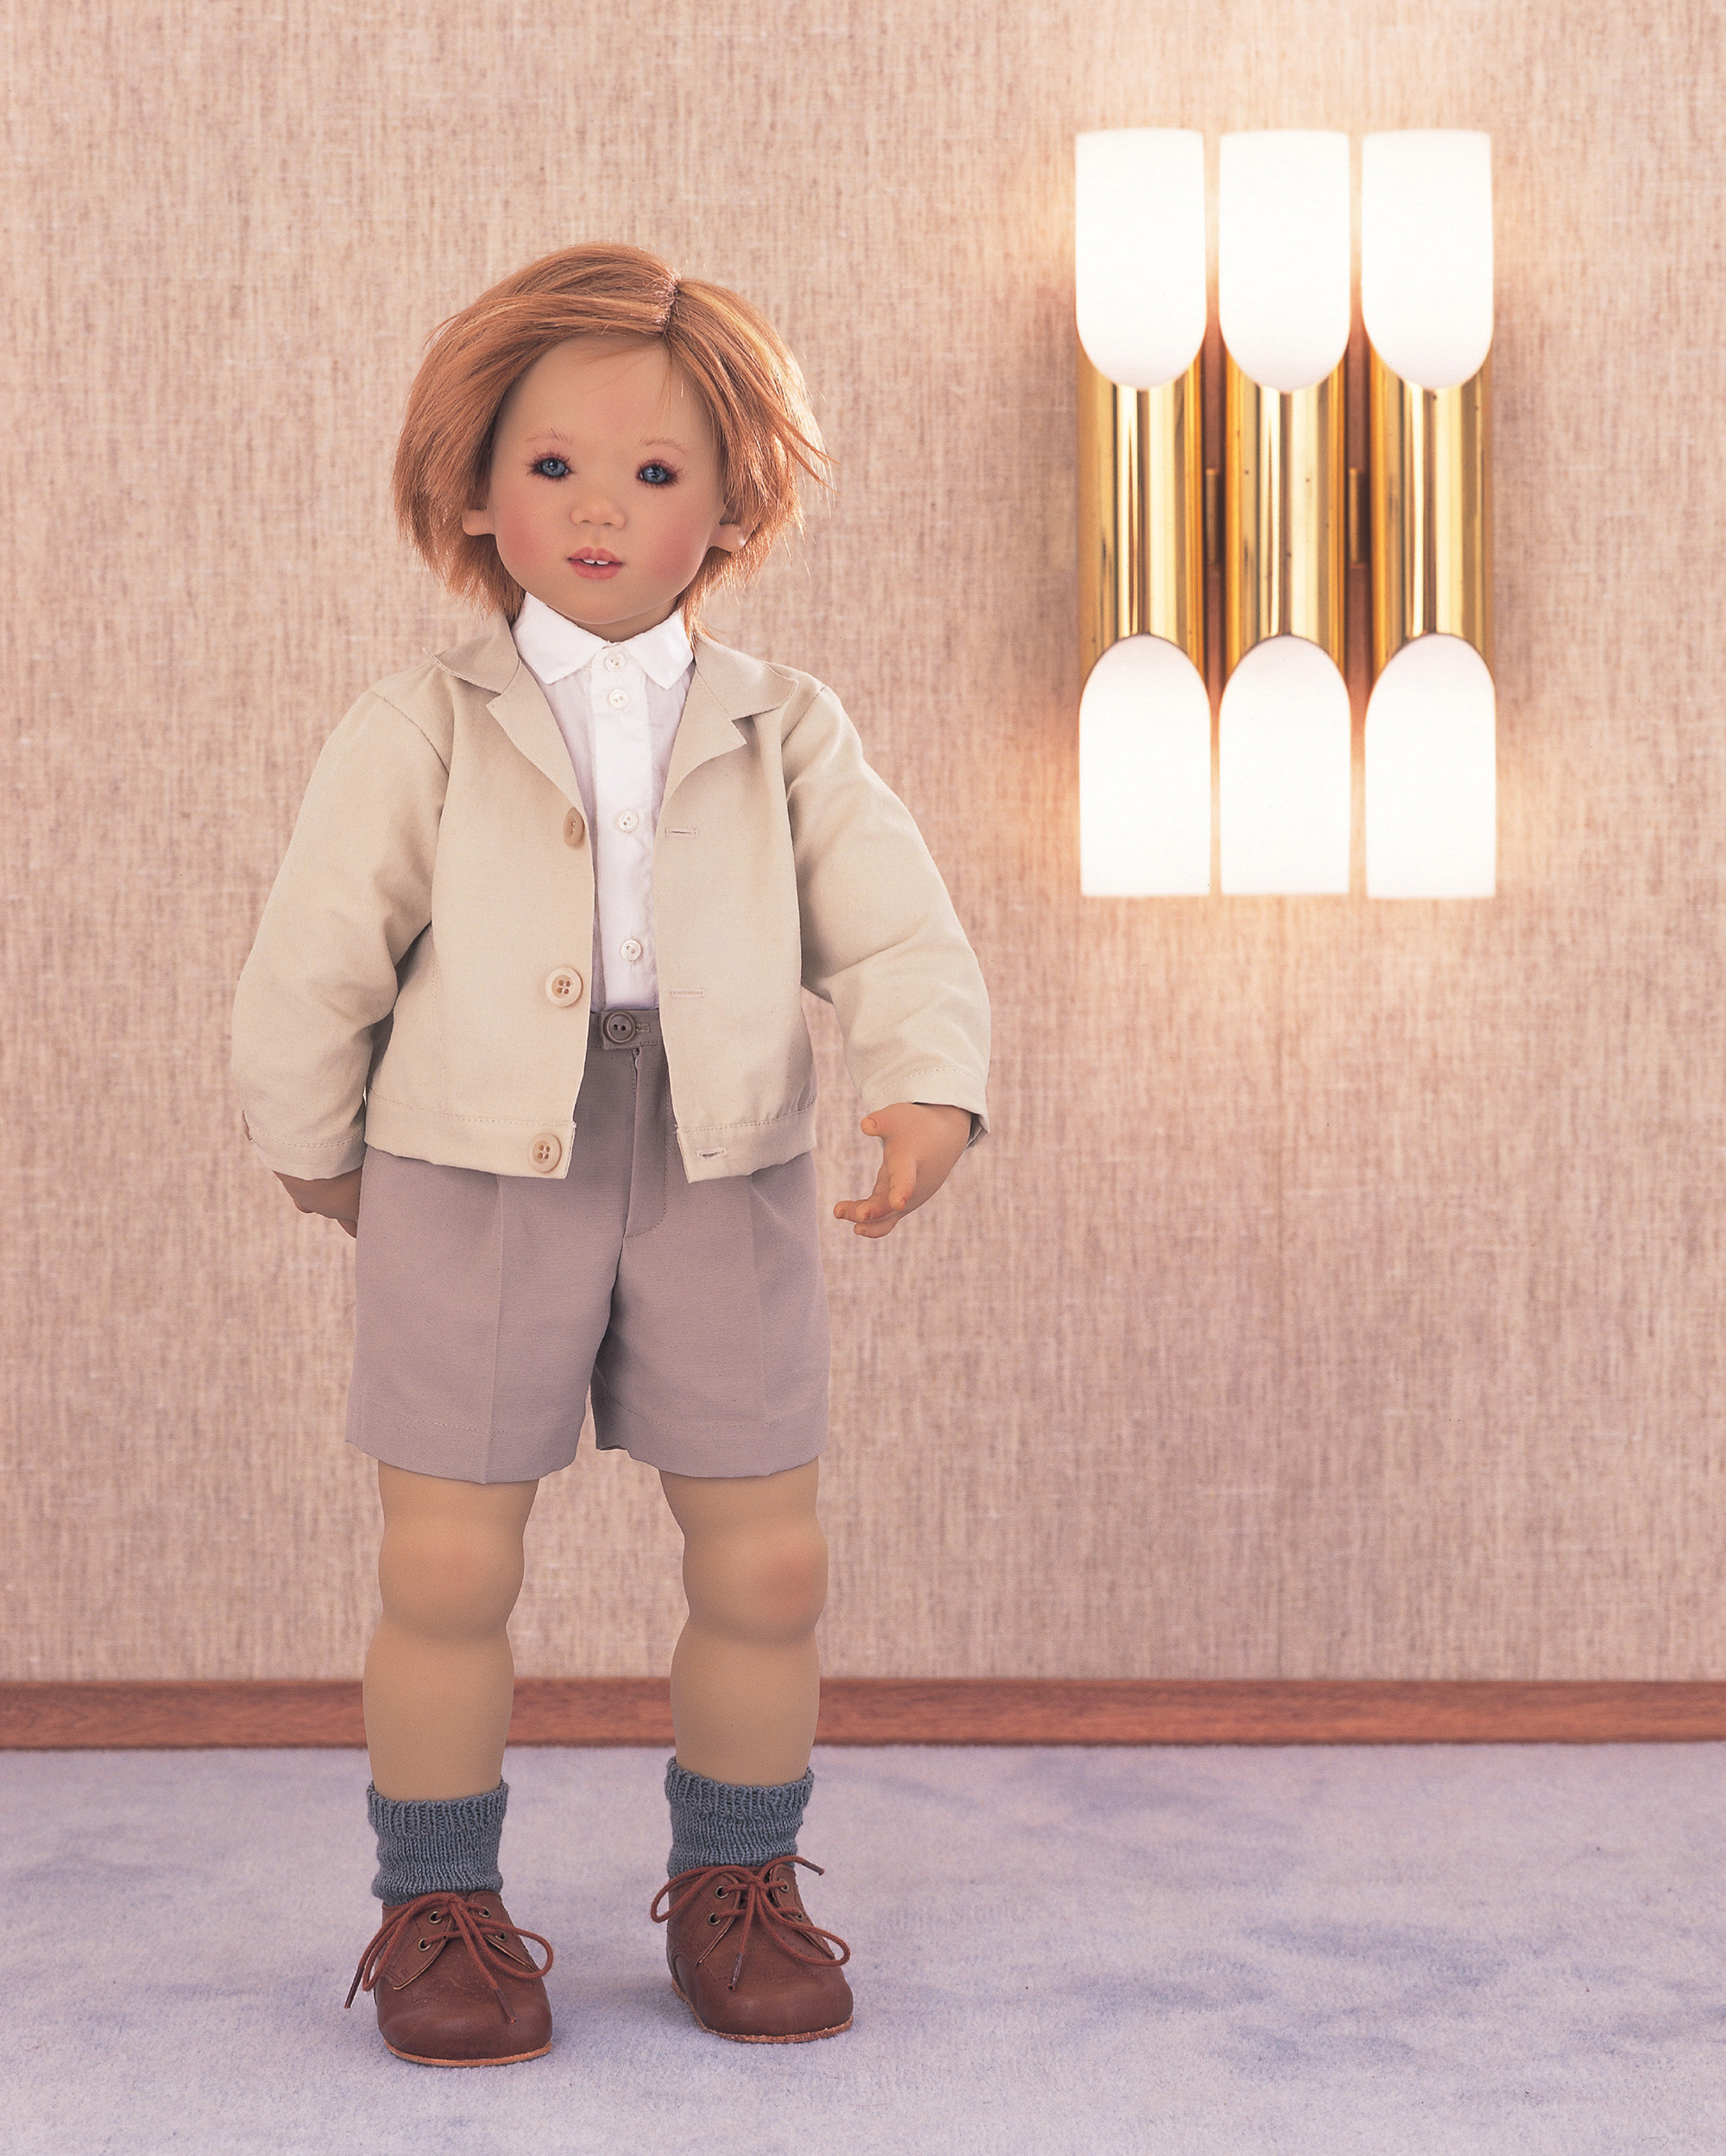 A photograph of a doll designed by Annette Himstedt depicting Emil, a boy from Germany.